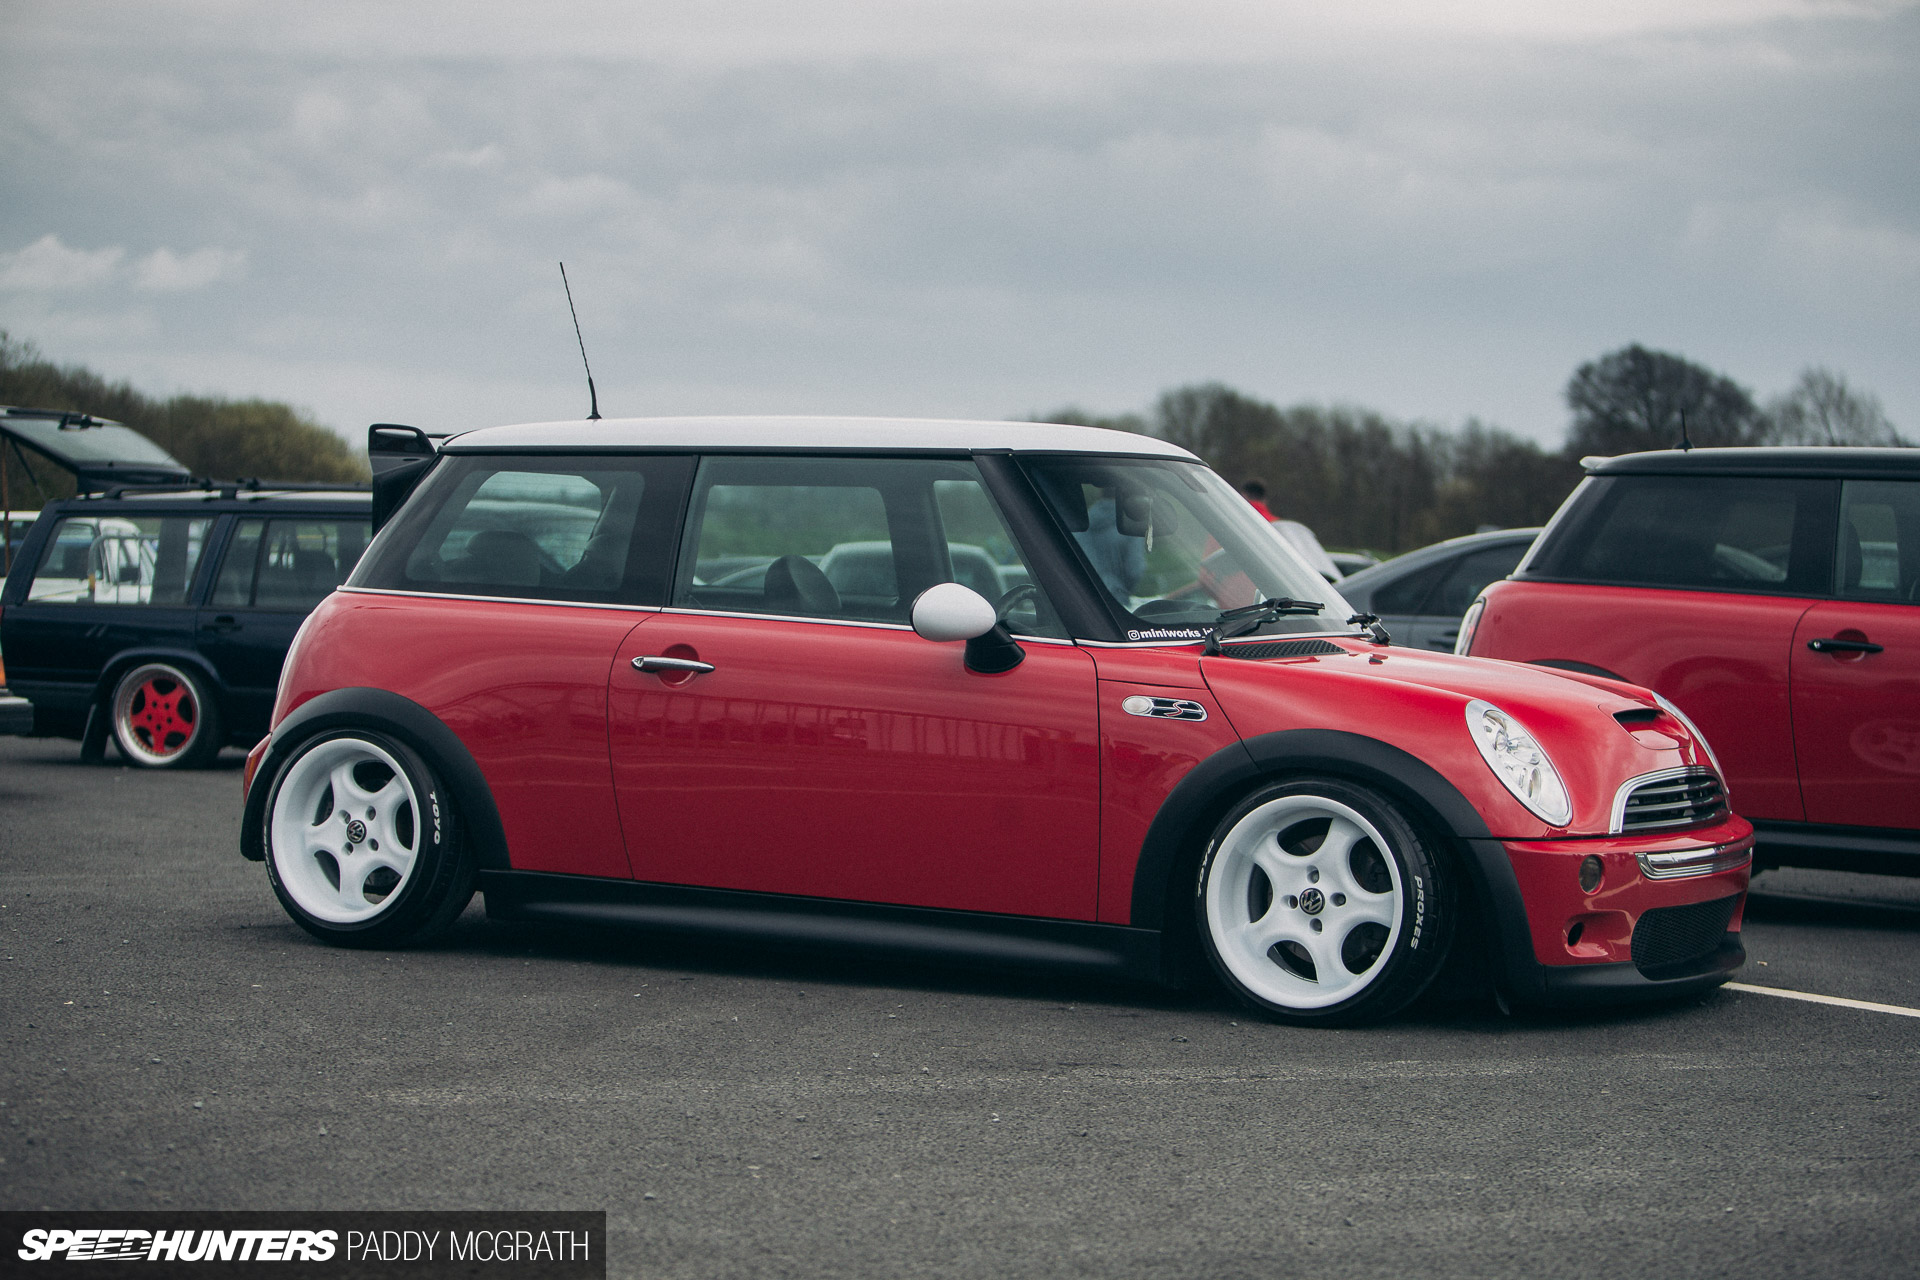 Dubshed: The Pride Of An Island - Speedhunters